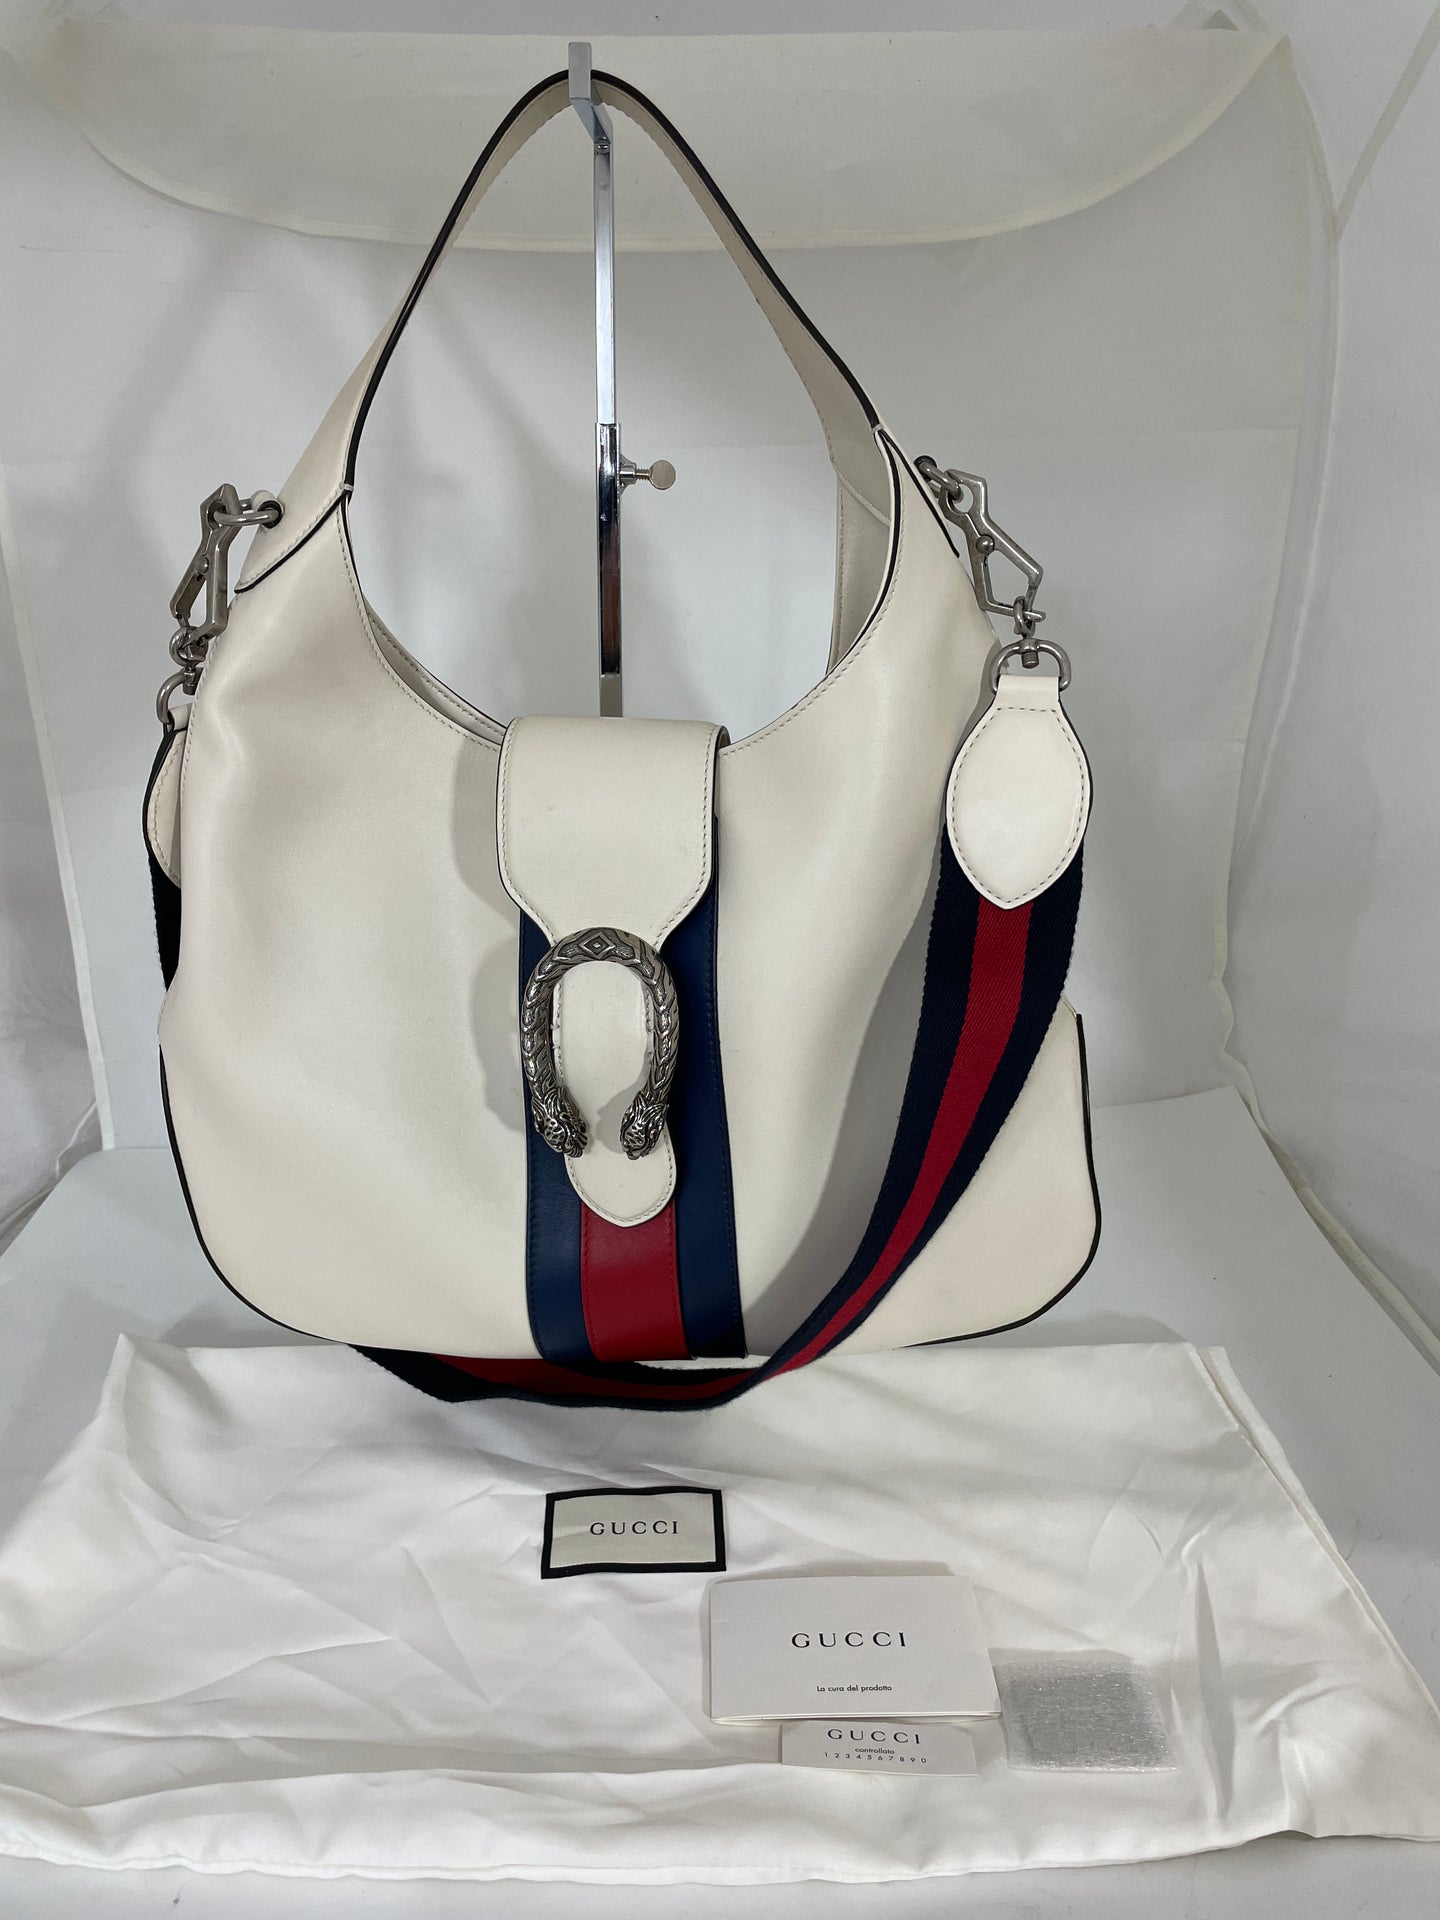 Gucci Dionysus Striped White Leather Hobo Bag